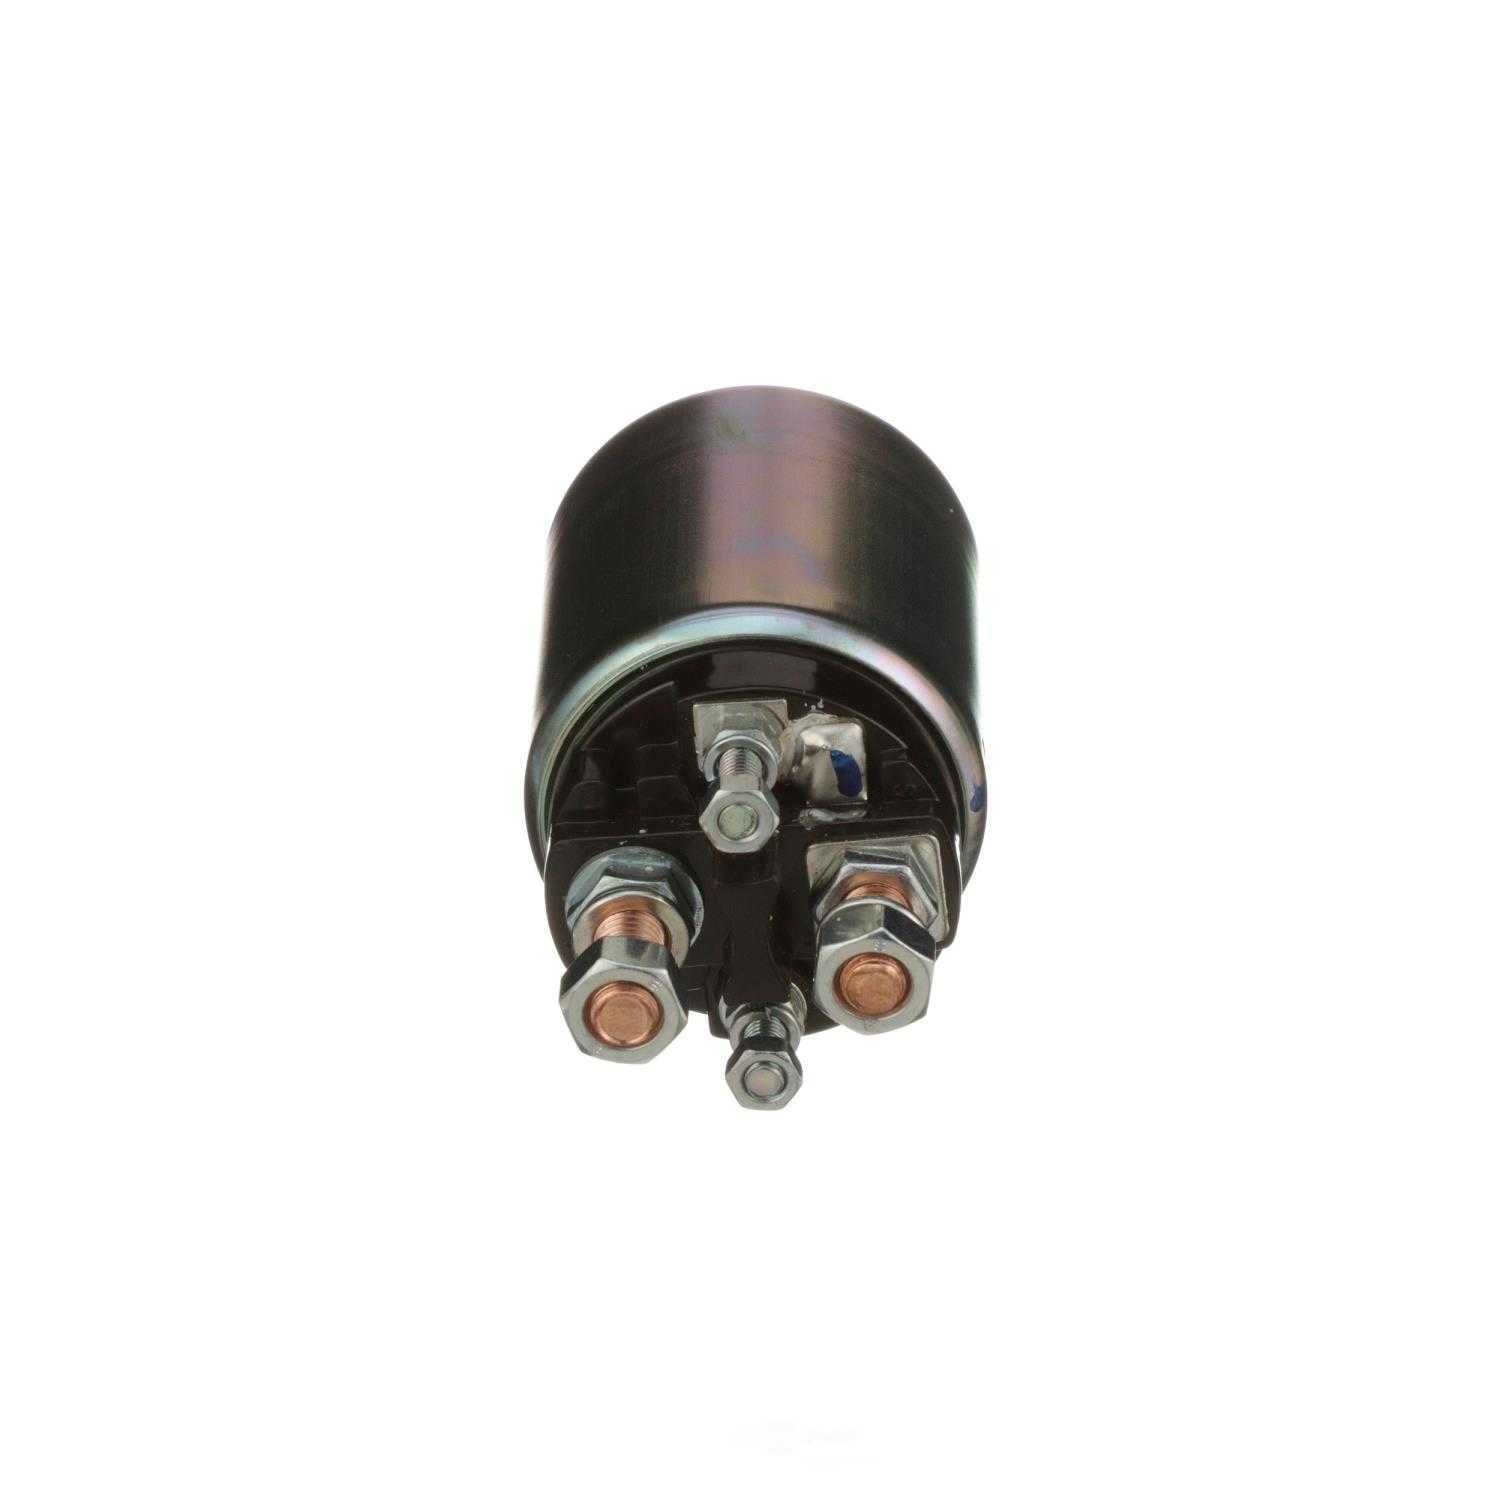 STANDARD MOTOR PRODUCTS - Starter Solenoid - STA SS-736